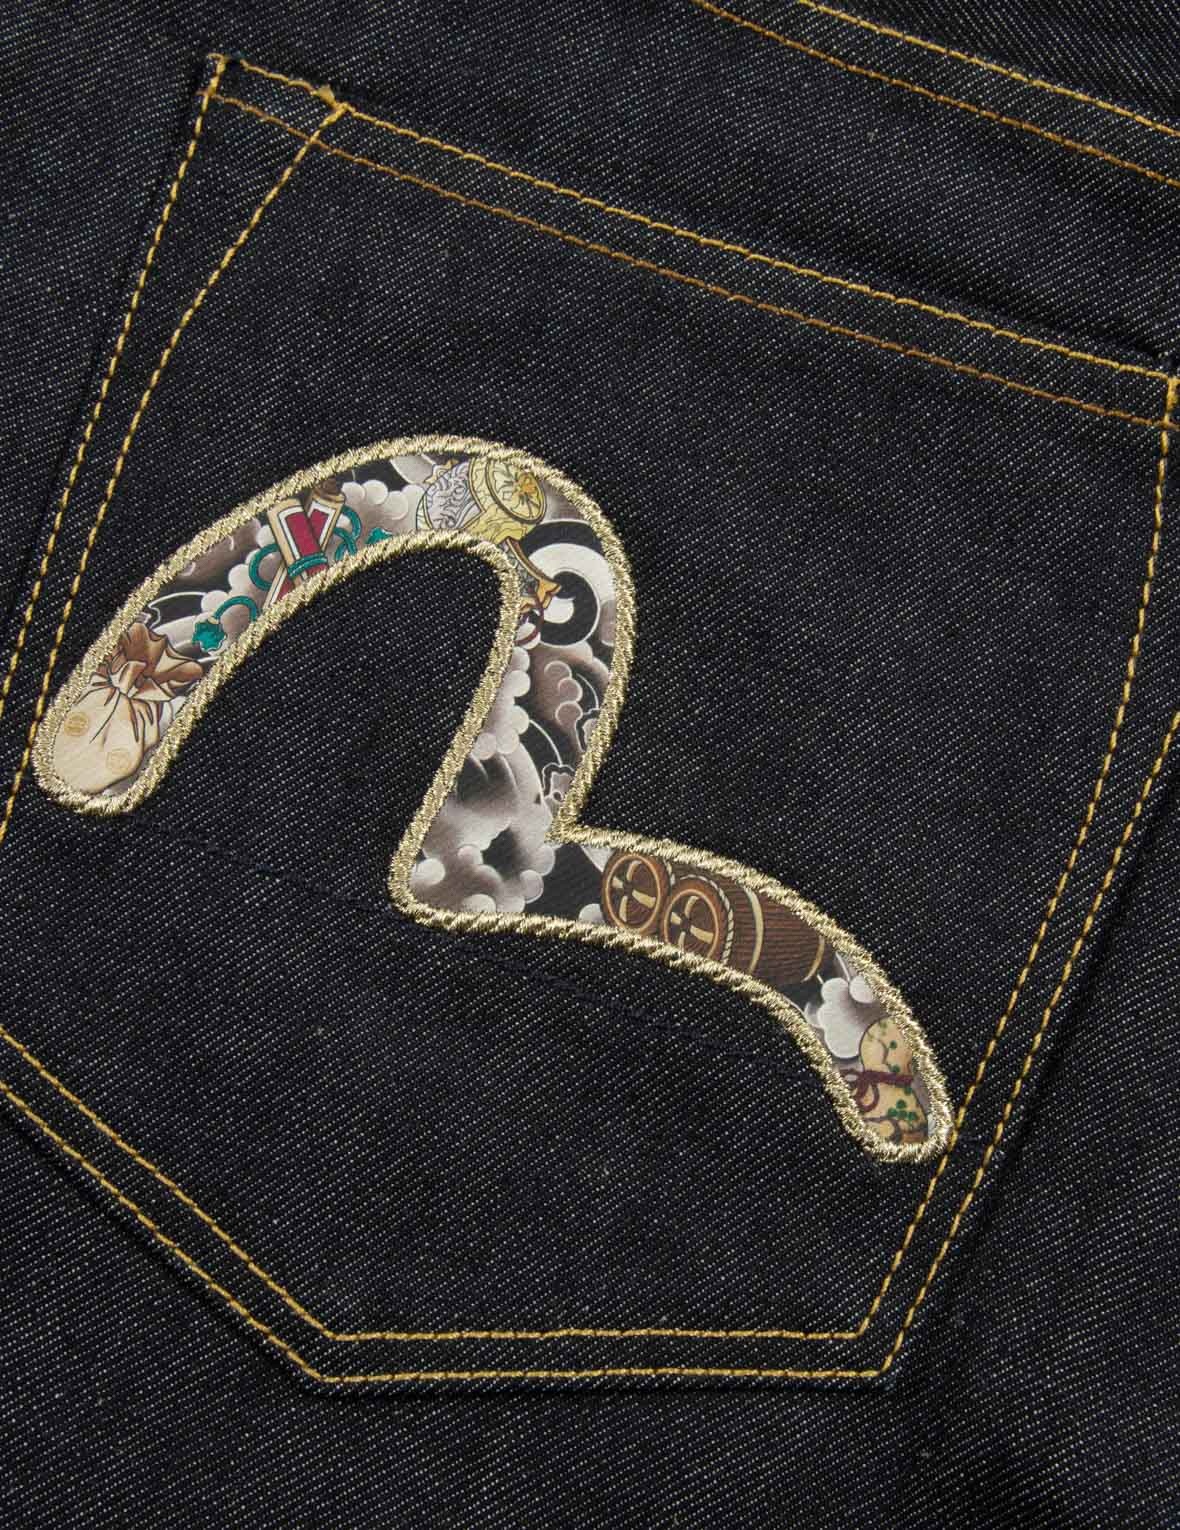 DEER AND SEAGULL EMBROIDERY SLIM FIT SELVEDGE DENIM JEANS #2010 - 8